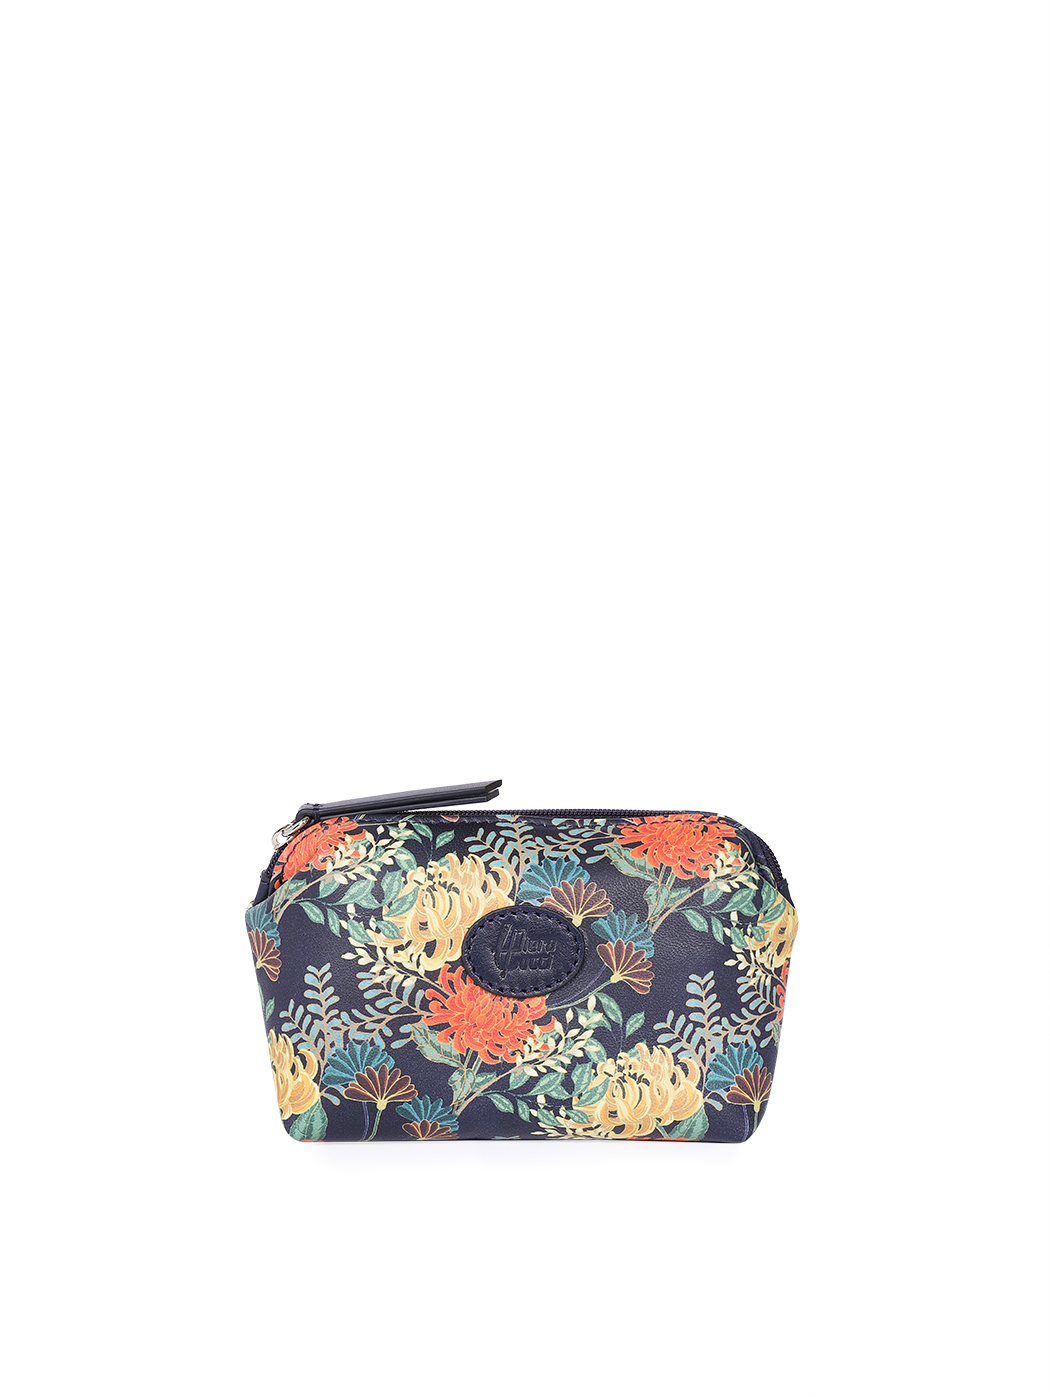 Cosmetic and Essentials Pouch - Floré Navy blue